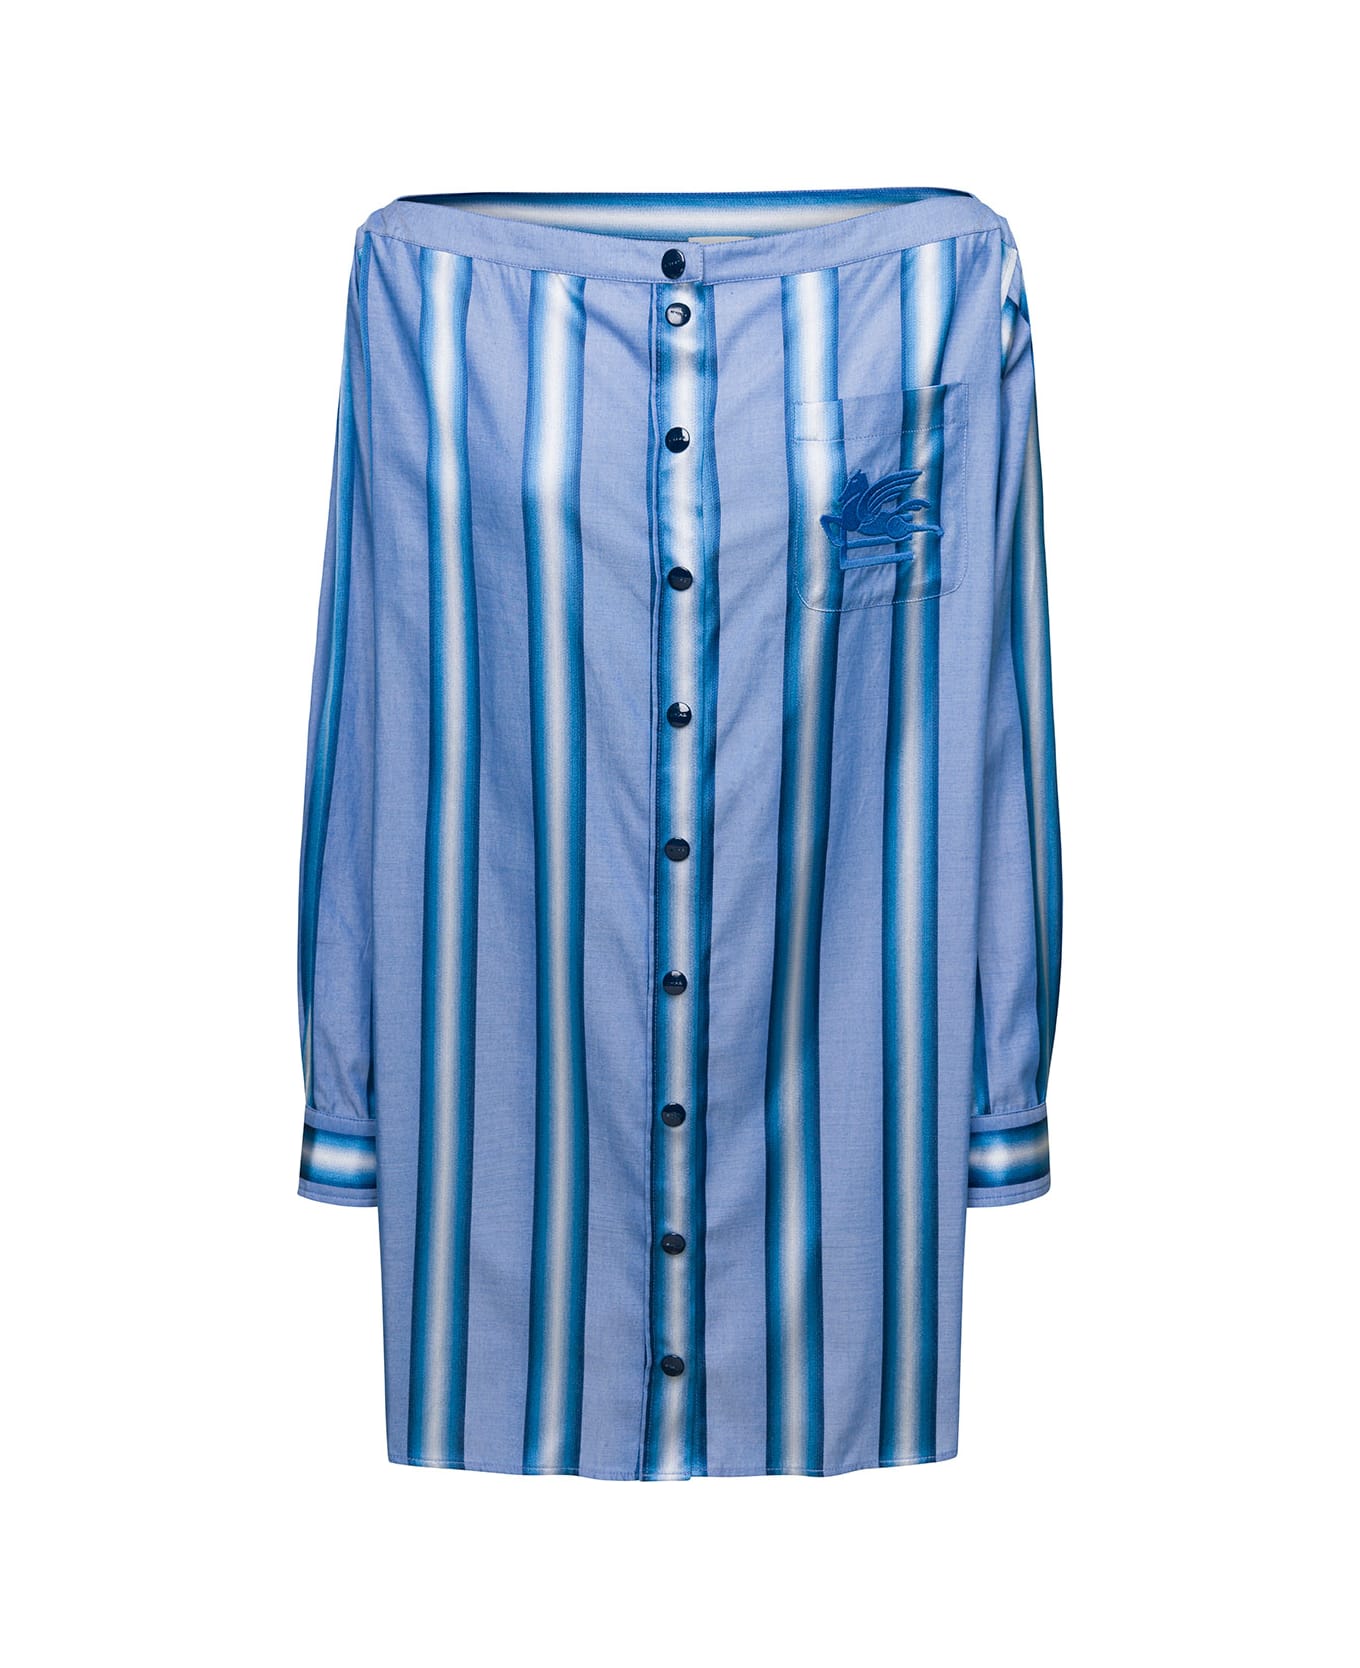 Etro Mini Light Blue Off-the-shoulders Striped Shirt Dress In Cotton And Silk Woman - Light blue